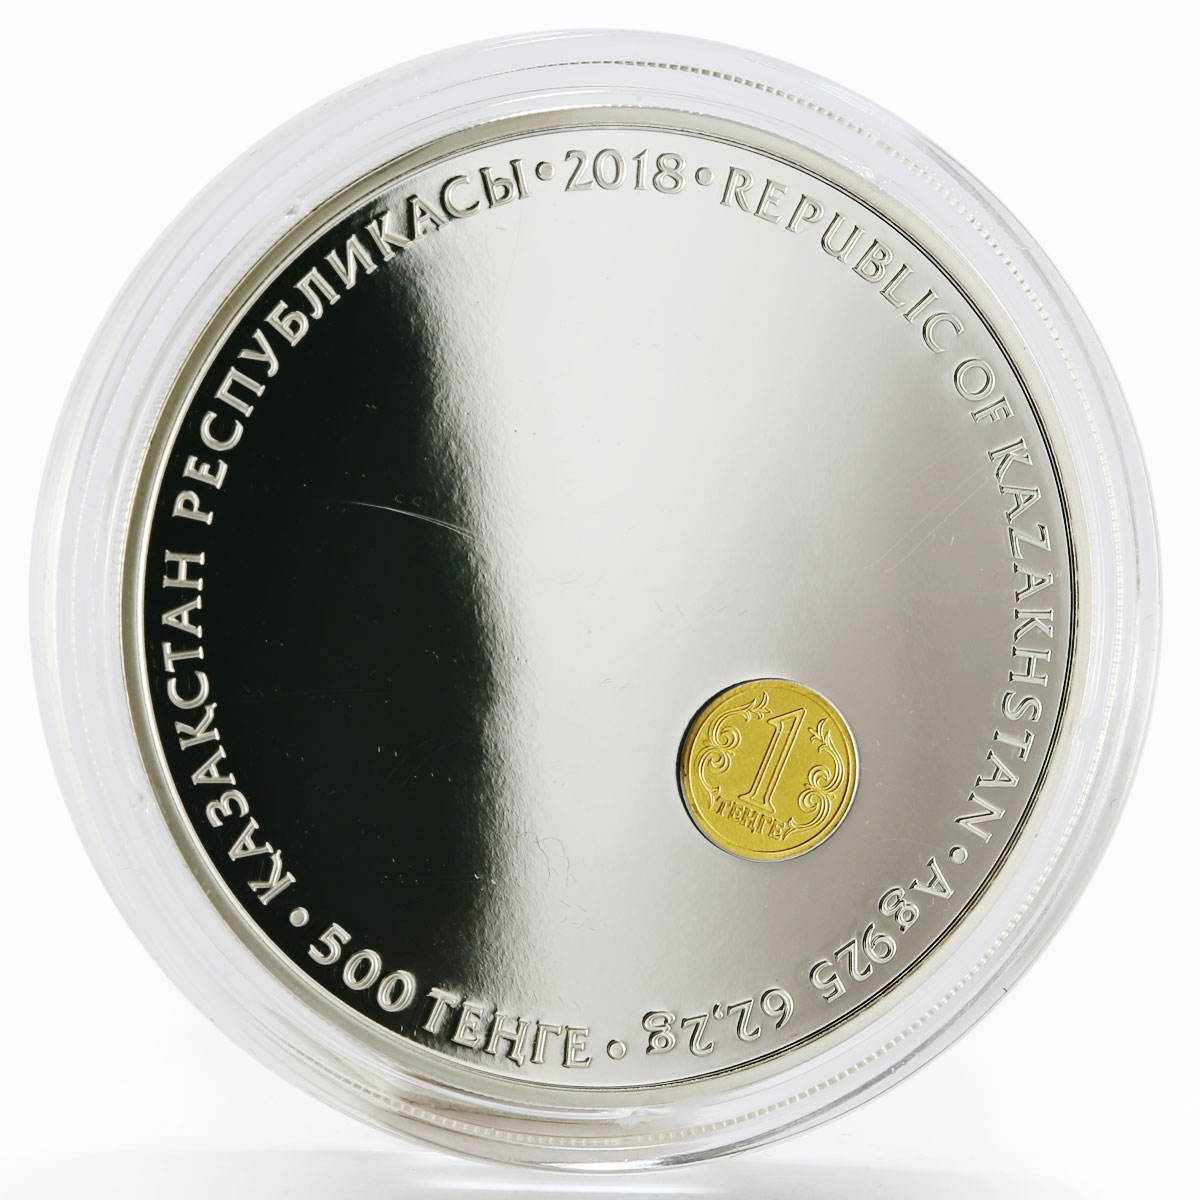 Kazakhstan 500 tenge 25th Anniversary of Tenge colored proof silver coin 2018